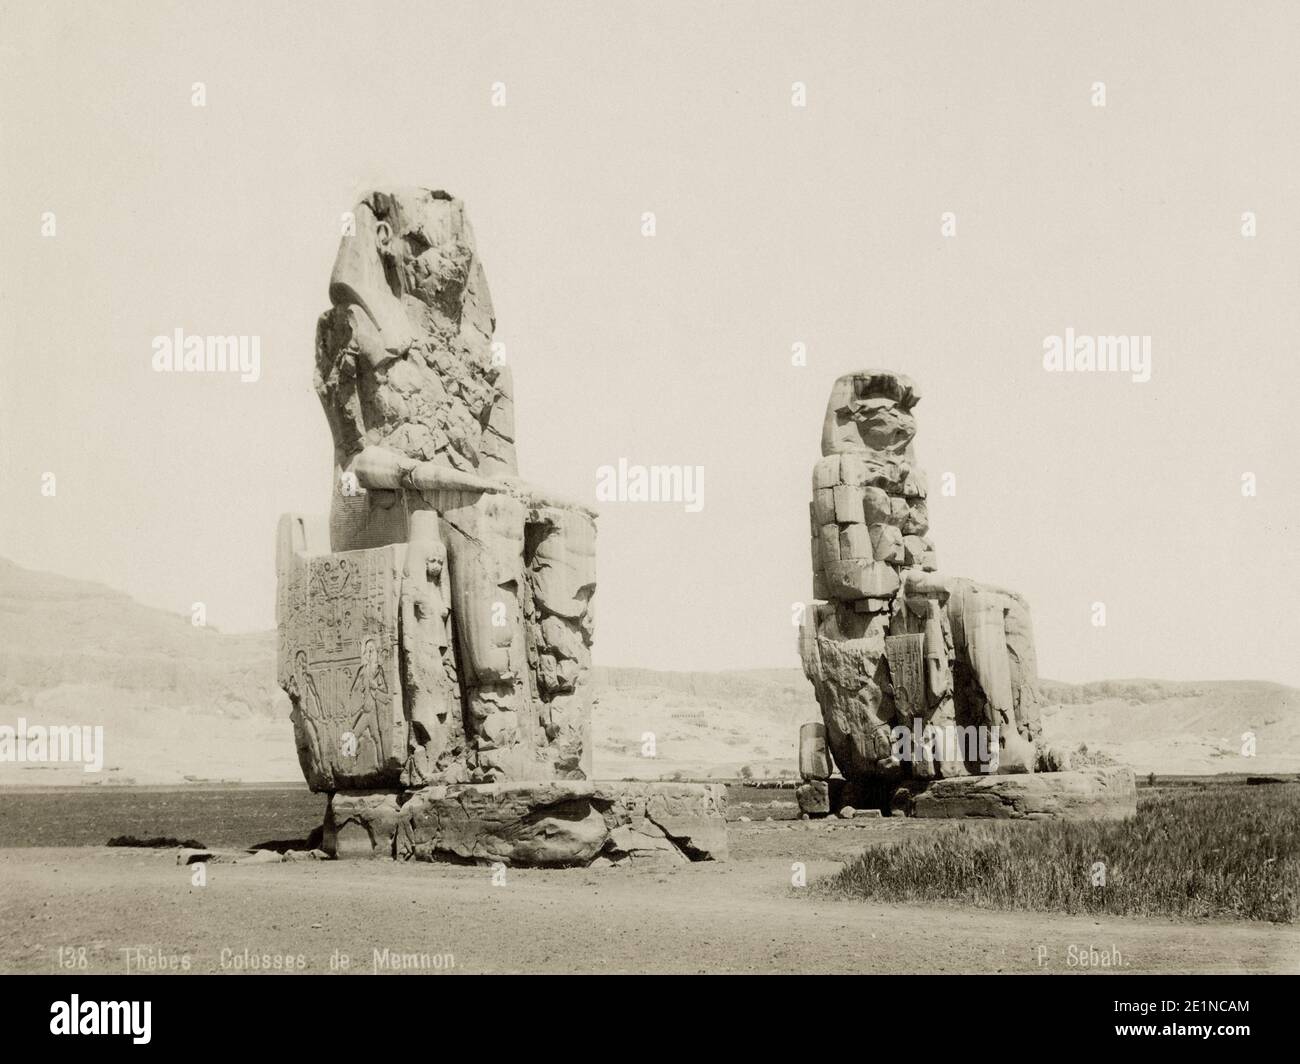 19th century vintage photograph: Thebes, Egypt, The Colossi of Memnon. The Colossi of Memnon are two massive stone statues of the Pharaoh Amenhotep III, who reigned in Egypt during the Eighteenth Dynasty of Egypt. Since 1350 BCE, they have stood in the Theban Necropolis, located west of the River Nile from the modern city of Luxor. c.1880's. Stock Photo